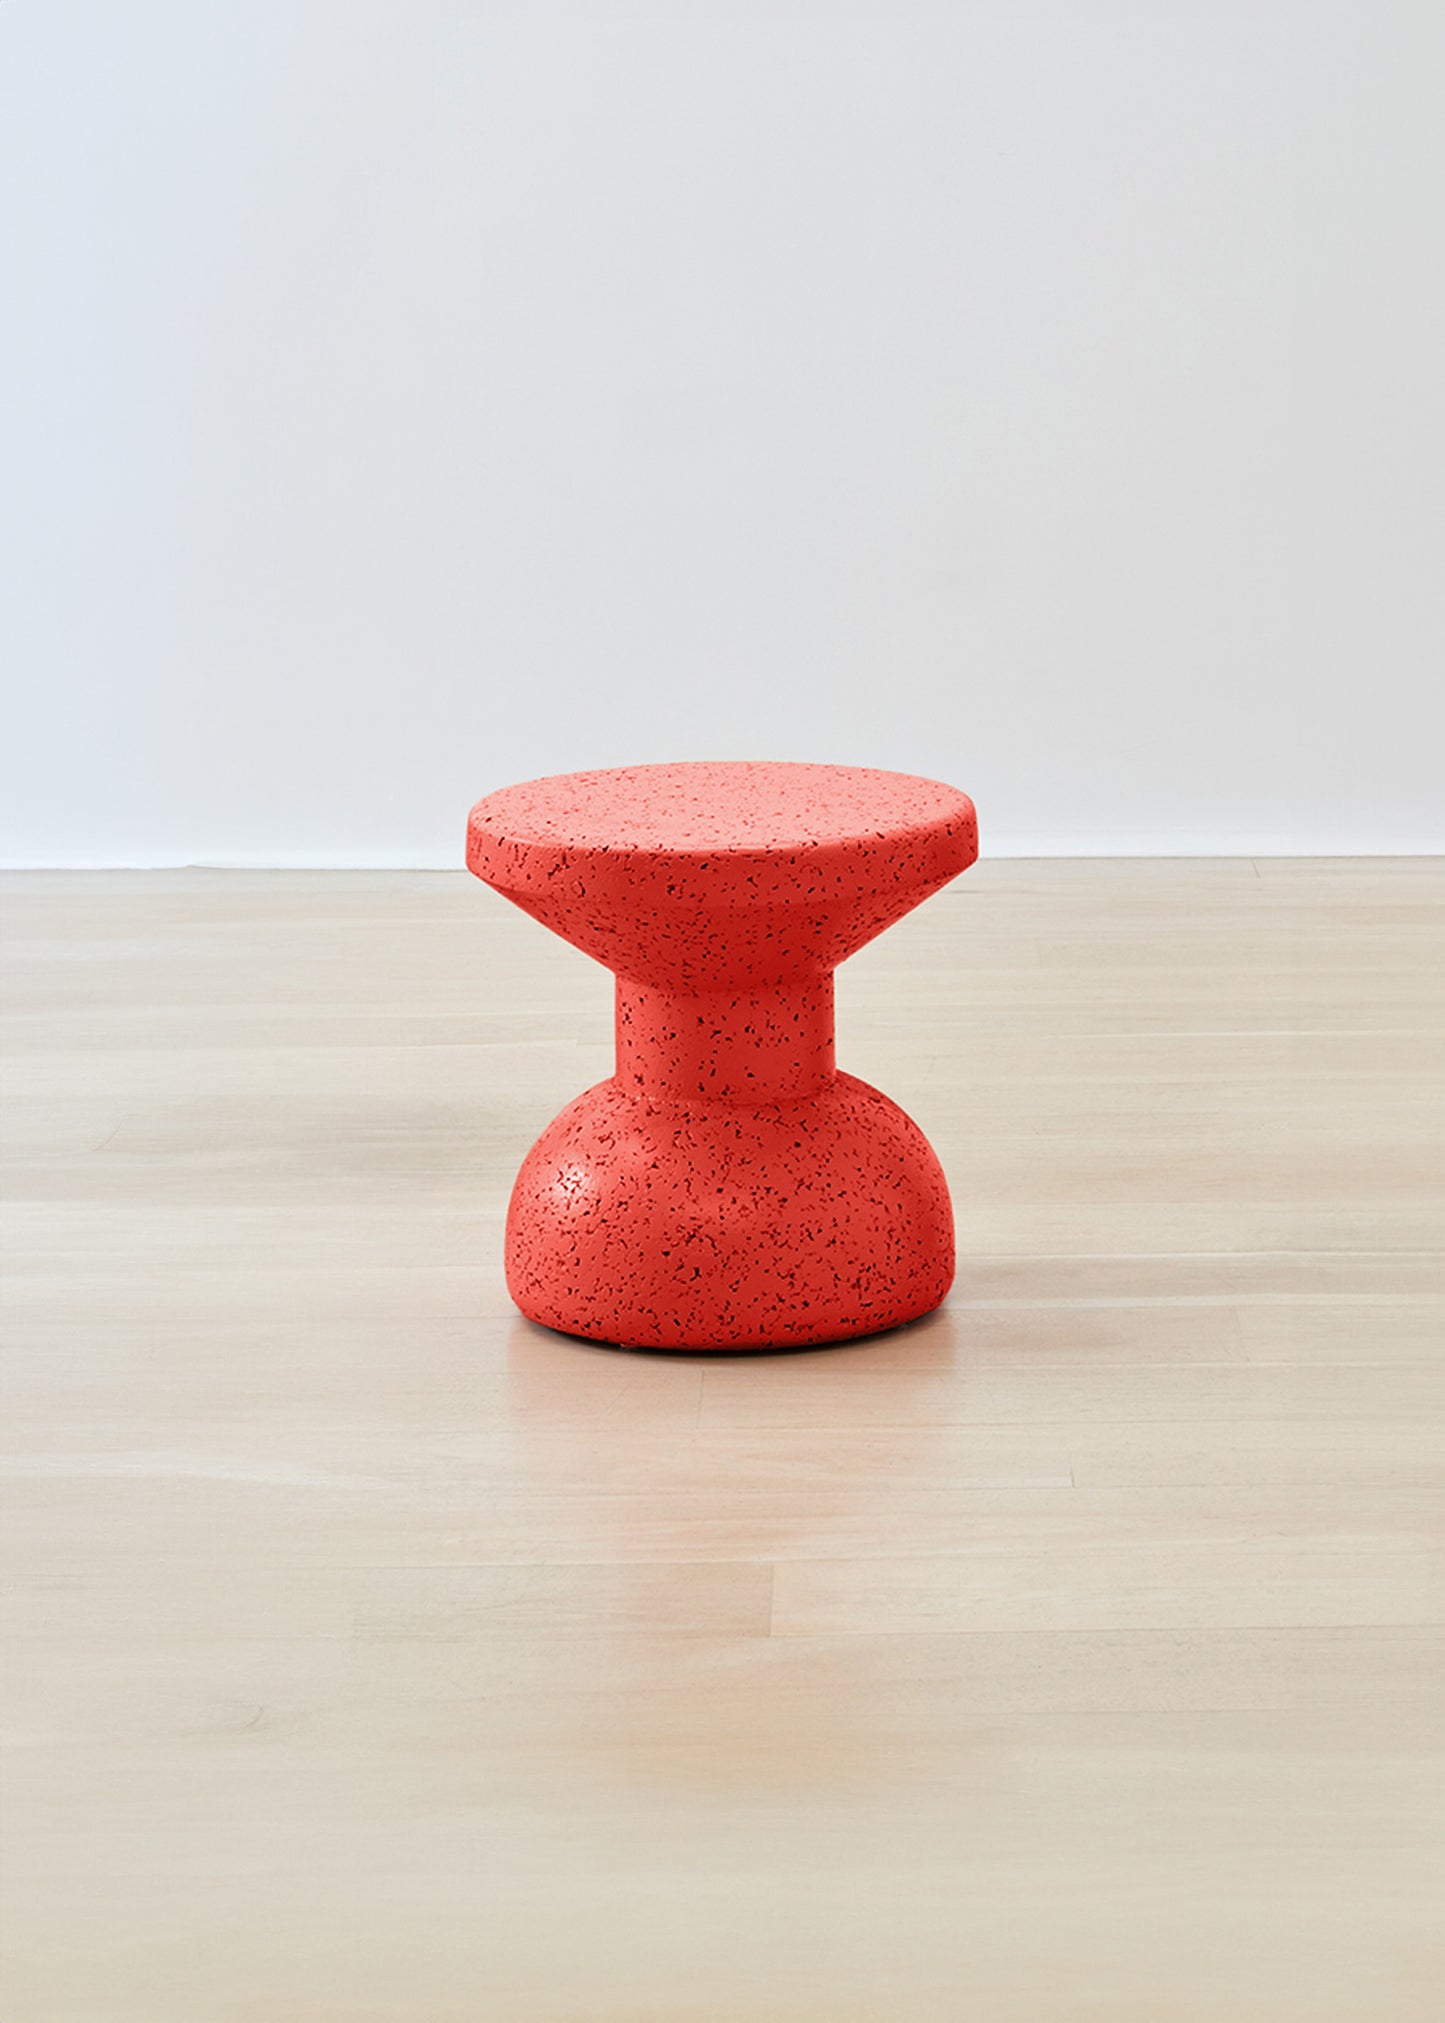 Sleek Kanju Wiid Painted African Slim Cork Stool in a rich red hue, embodying a fusion of contemporary design and sustainability. This slim-profile stool highlights the elegance of cork with a vibrant red finish, making it an ideal choice for modern interiors looking for a touch of bold, eco-friendly sophistication.